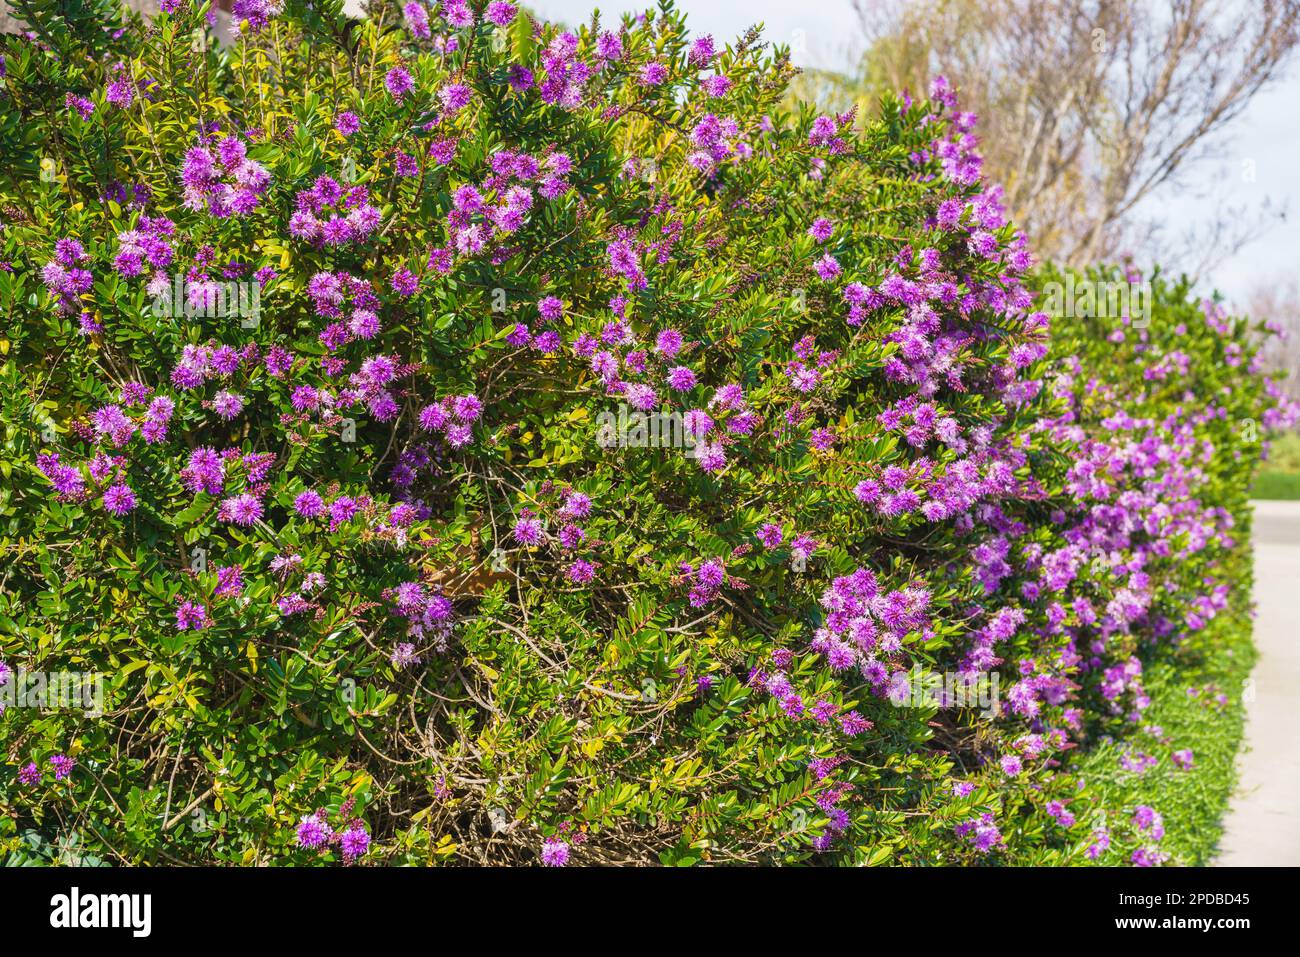 The shrub veronica or hebe plant, ornamental plant with beautiful pink-purple flowers, planted along the footpath in city park Stock Photo